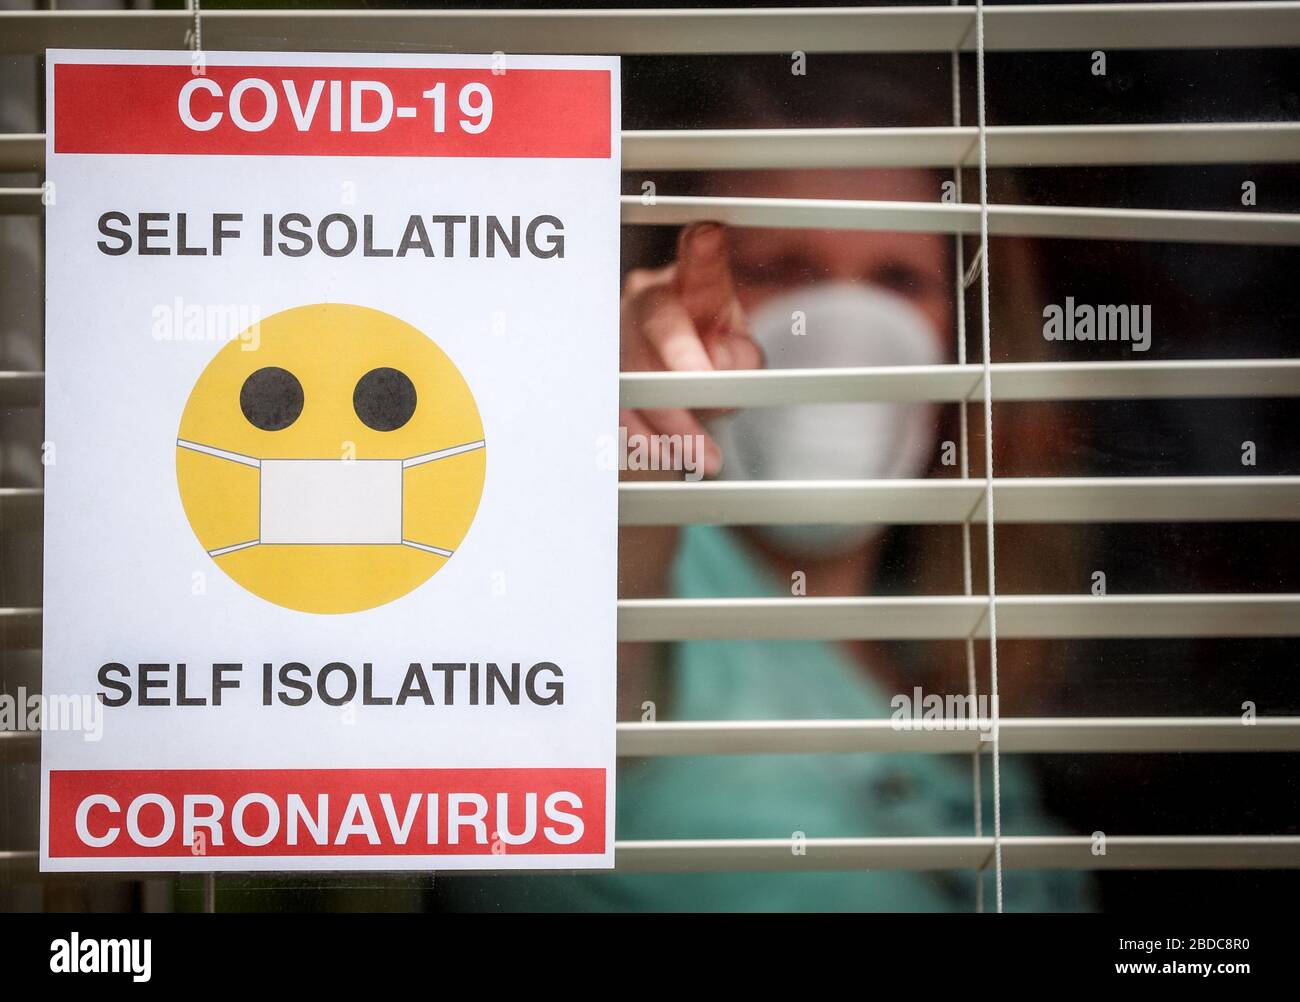 A woman in self isolation at home in the UK during the coronavirus Covid 19 pandemic. Stock Photo